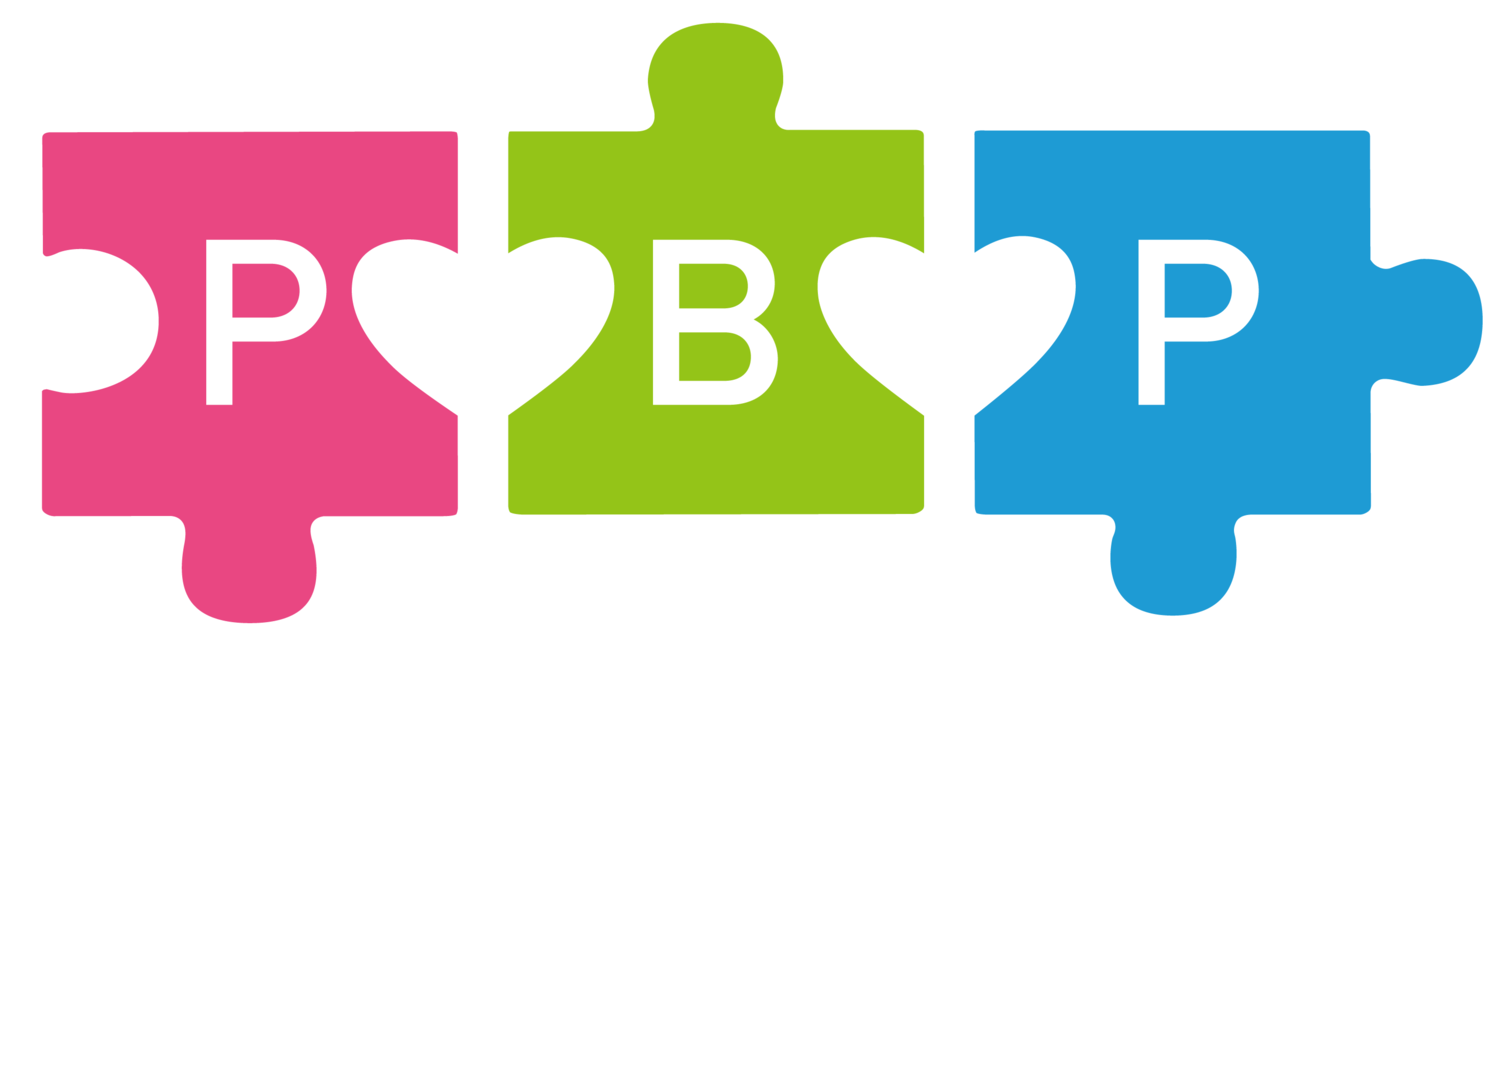 Piece-by-Piece Behavioral Therapy